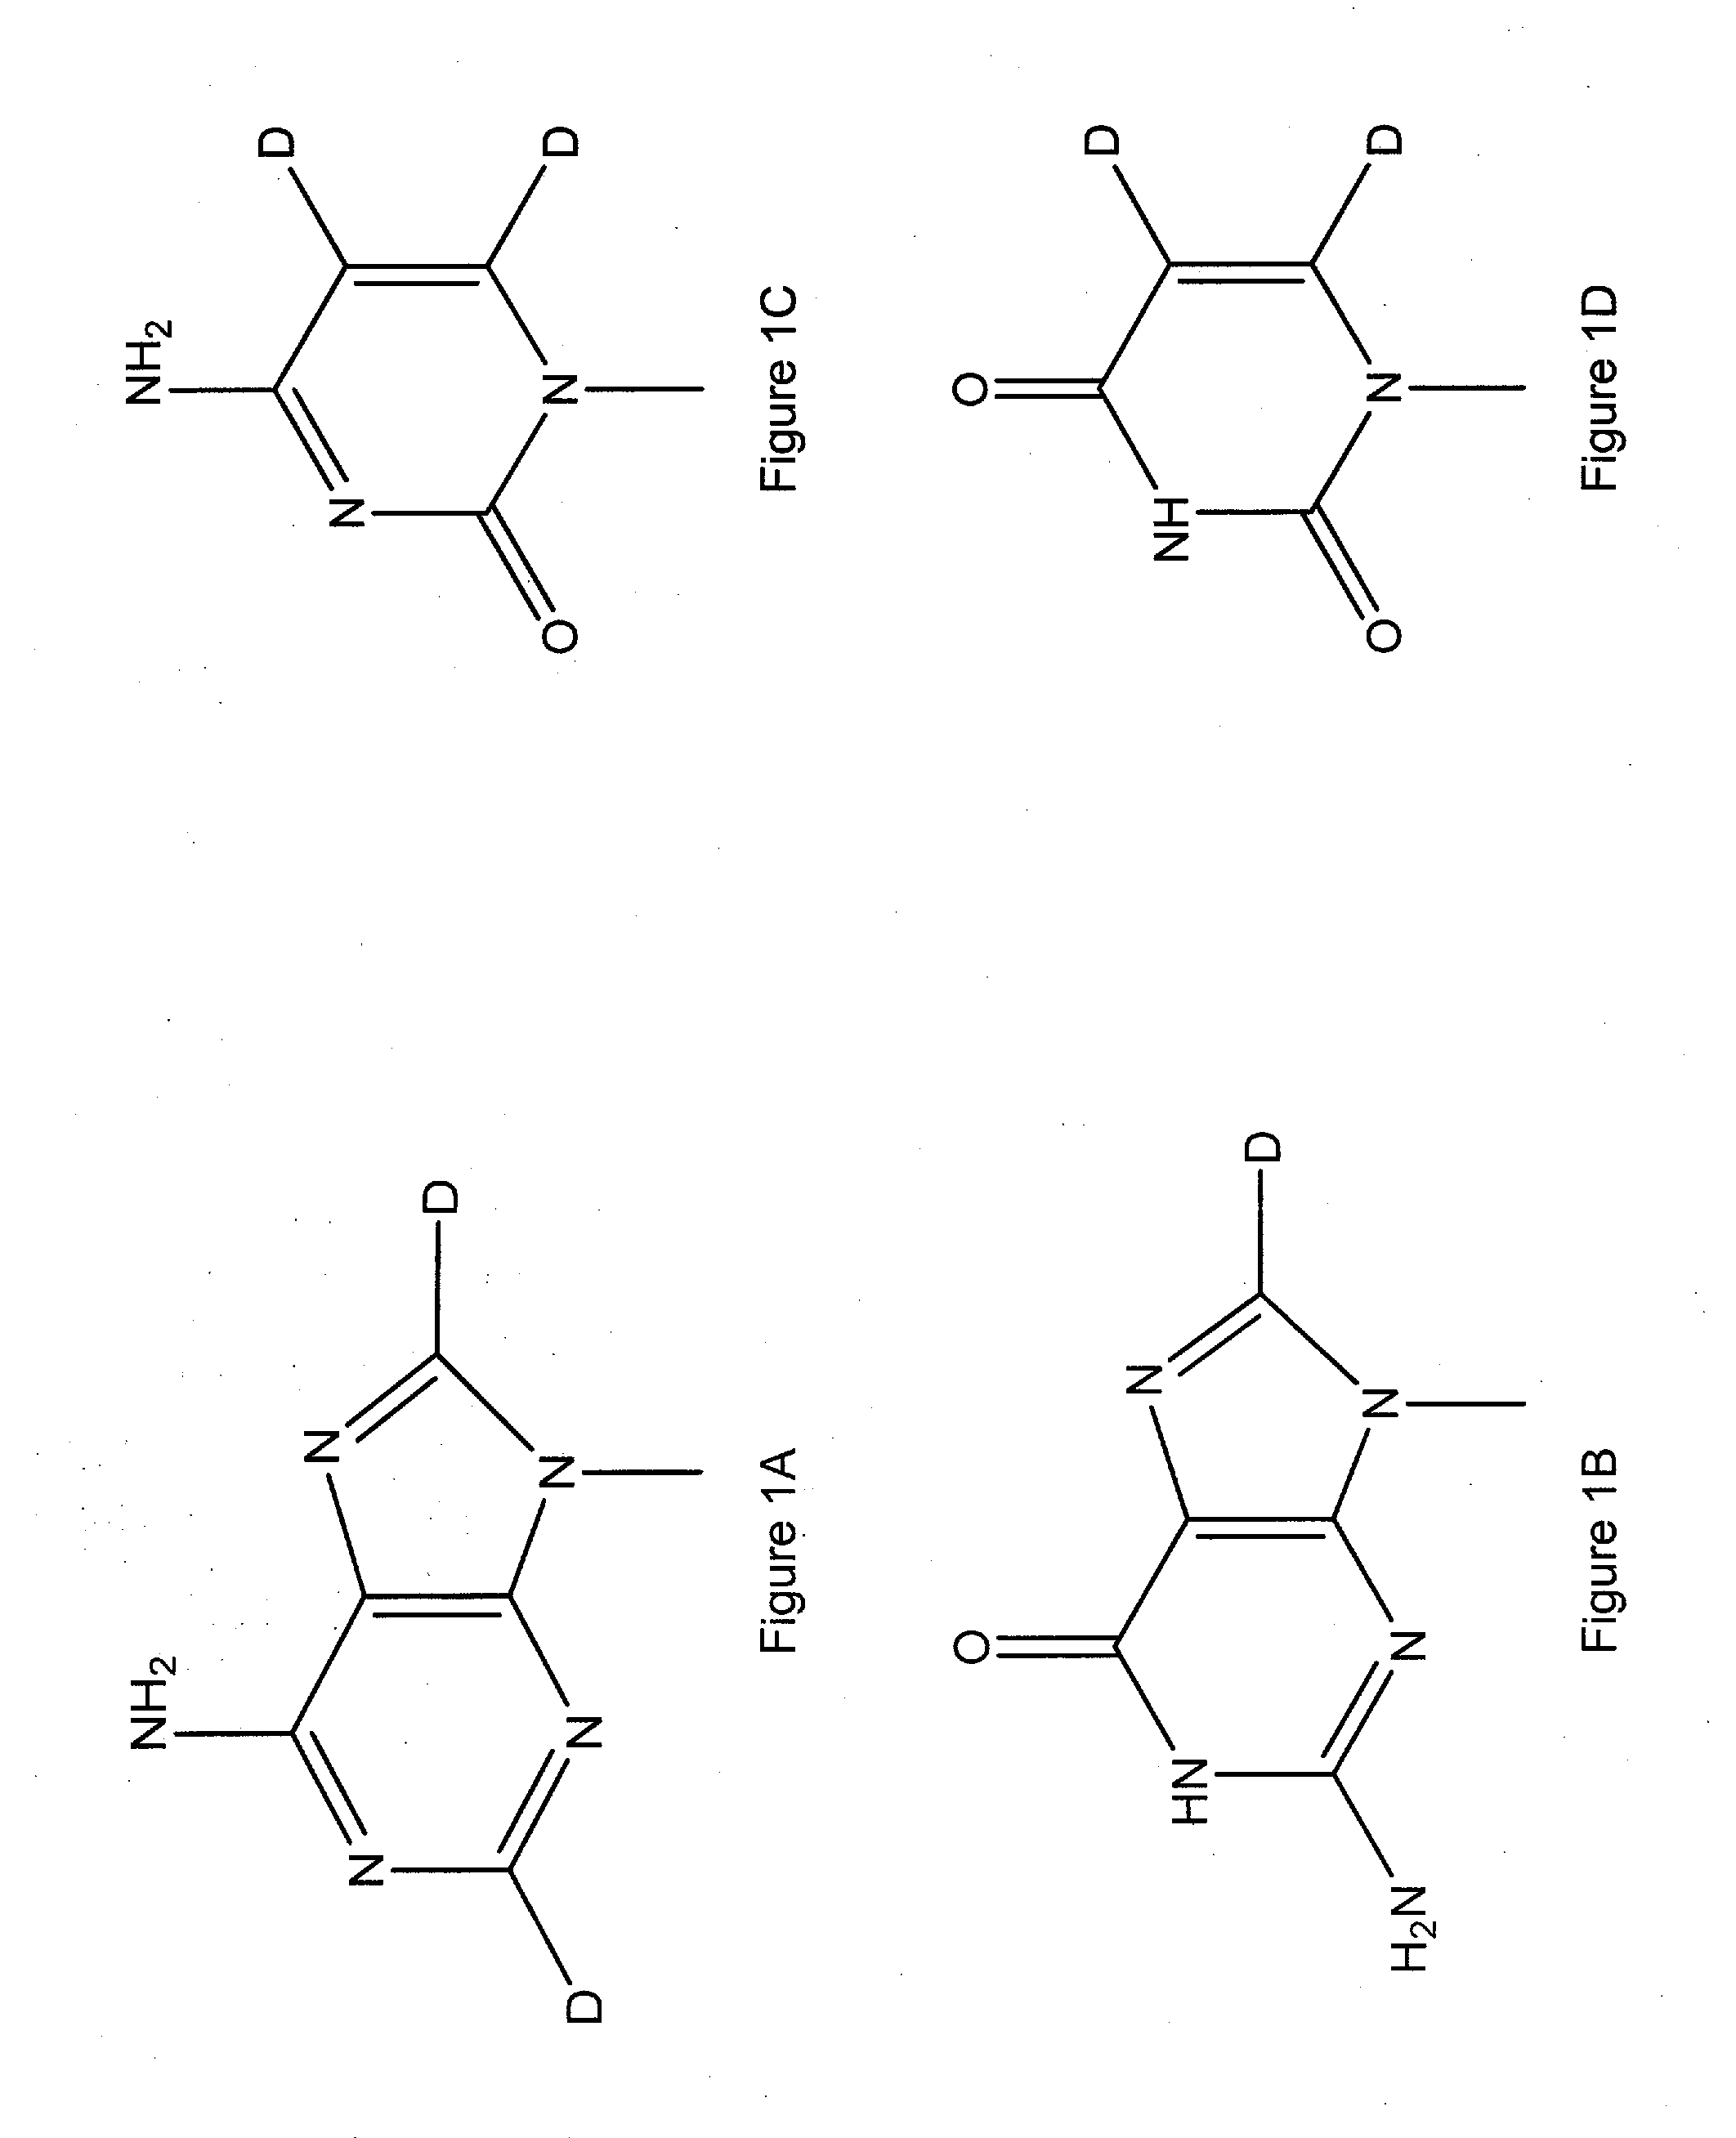 Synthesis of deuterated ribo nucleosides, N-protected phosphoramidites, and oligonucleotides